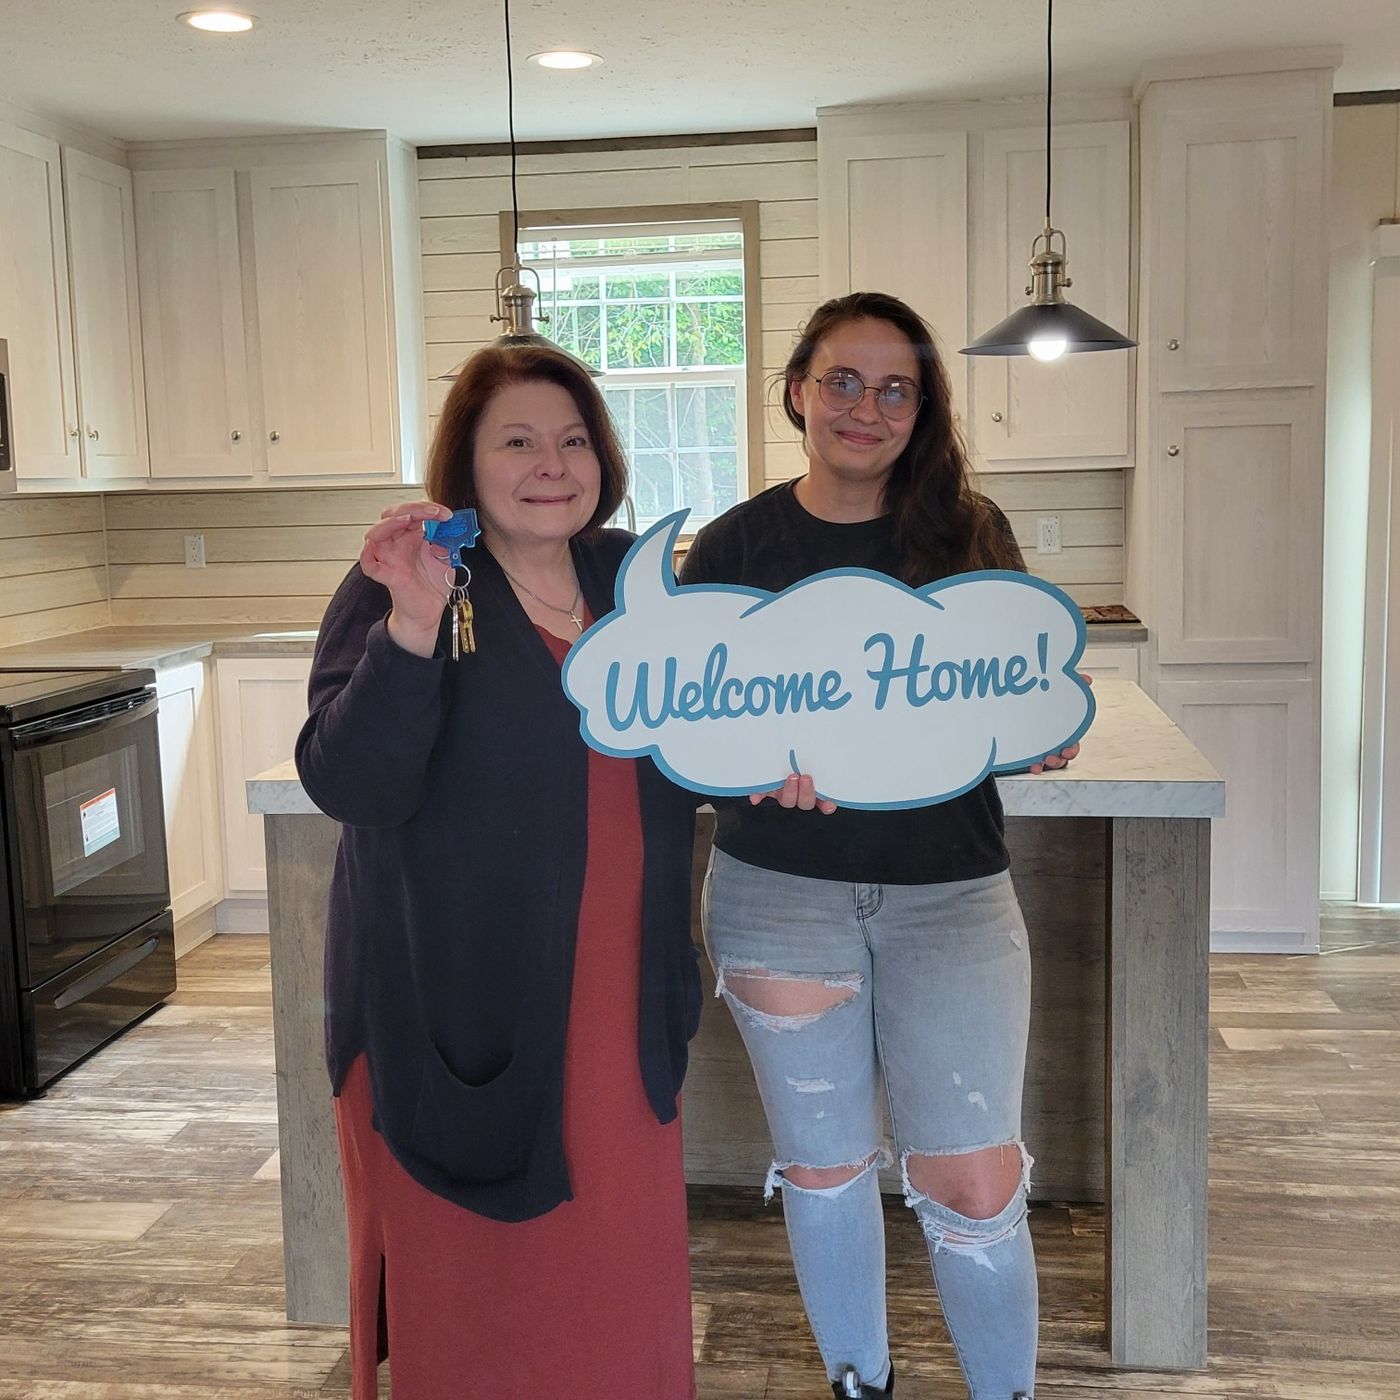 DEBBIE L. welcome home image